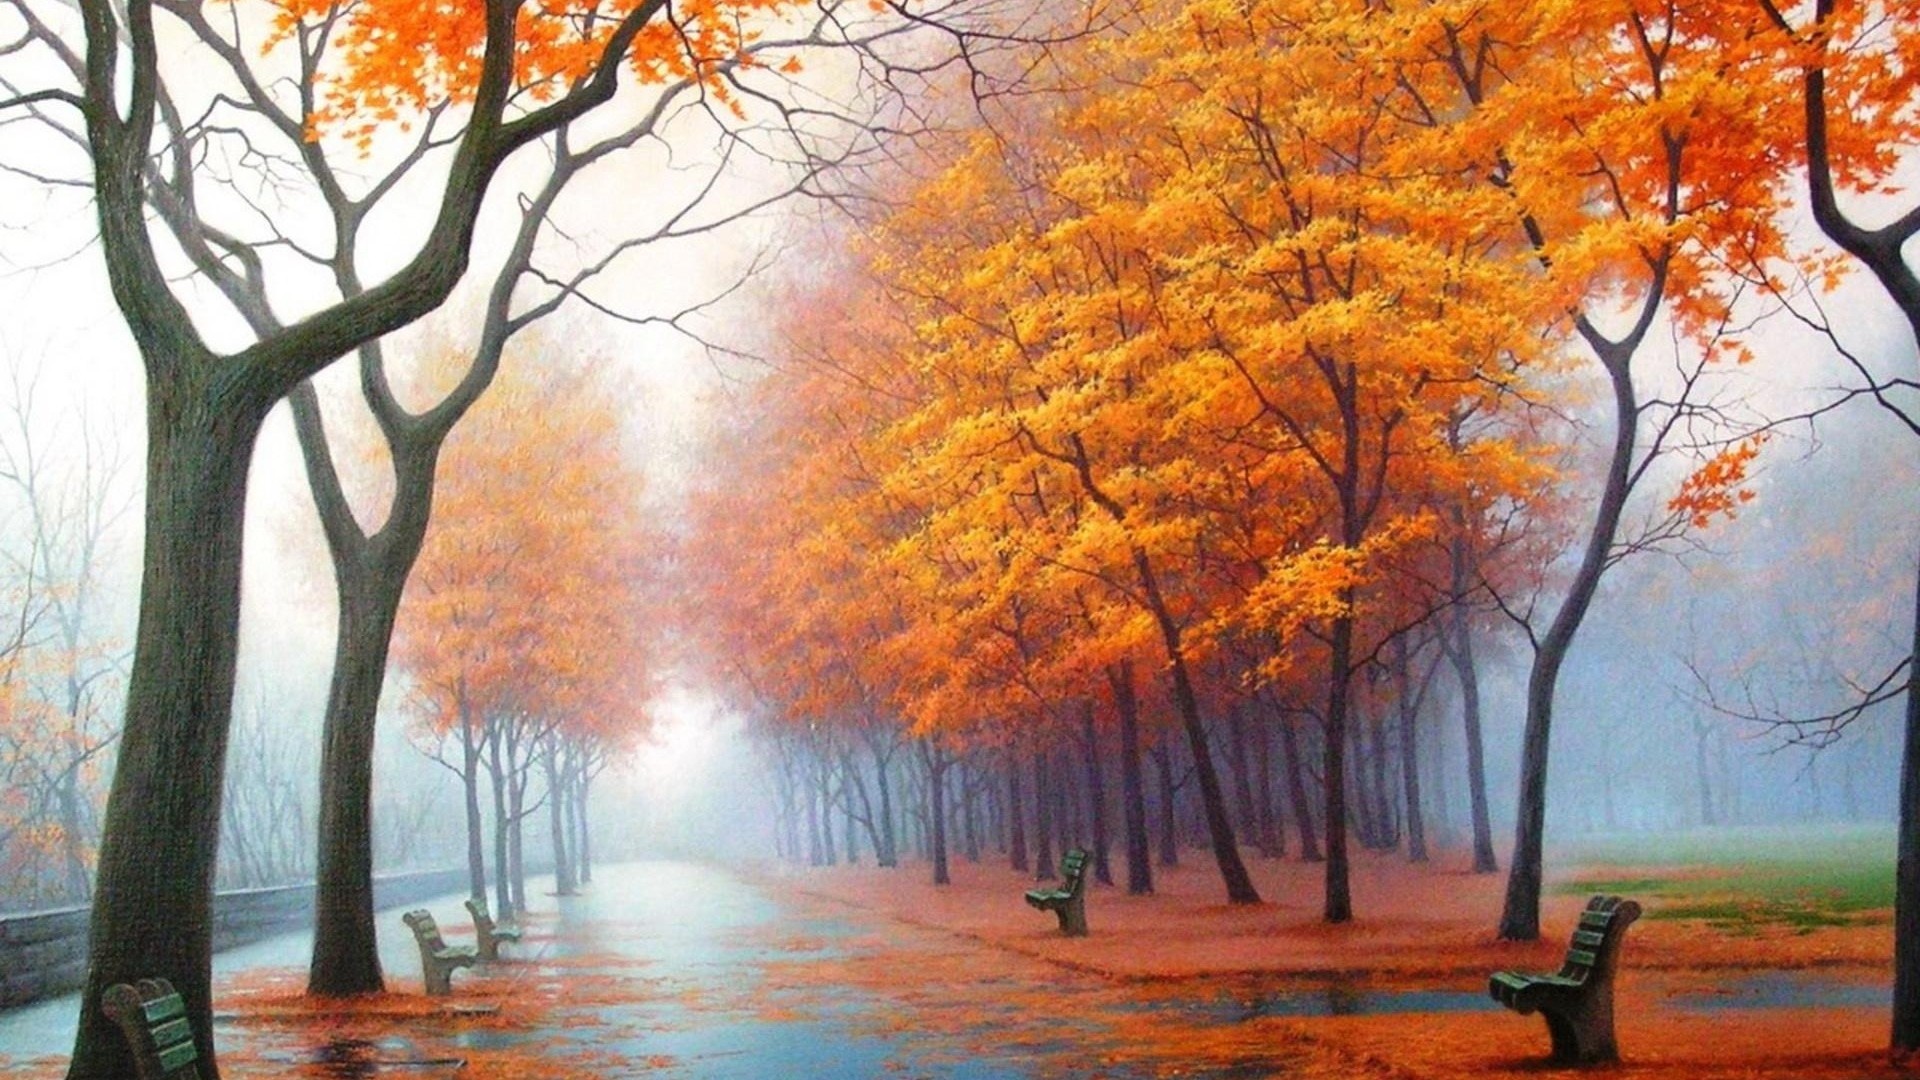 536562 1920x1080 autumn wallpaper android JPG 611 kB  Rare Gallery HD  Wallpapers